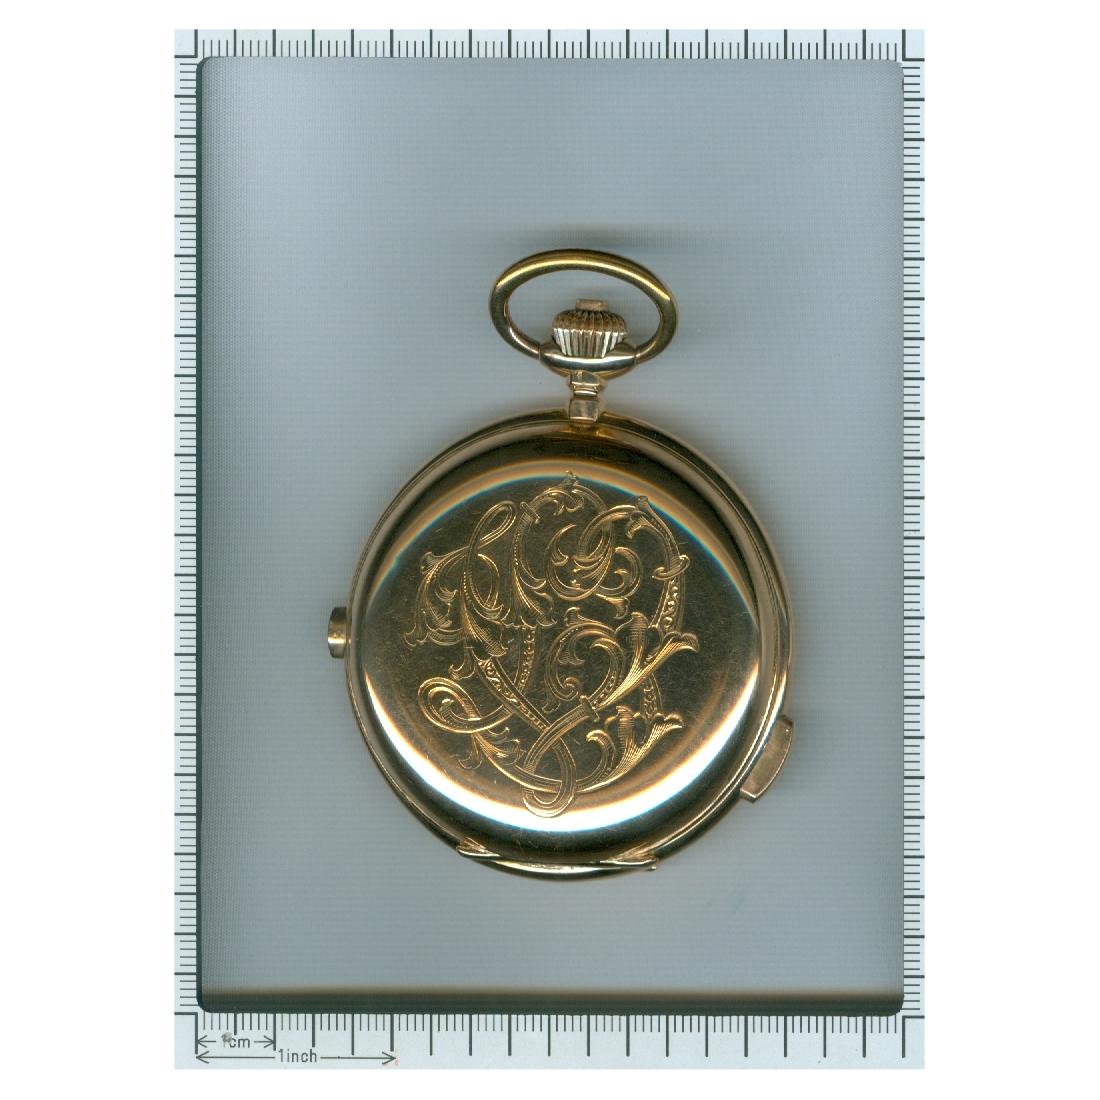 Stunning Victorian Ancre Gold Pocket Watch with Sonnerie Quarter Repeater 6